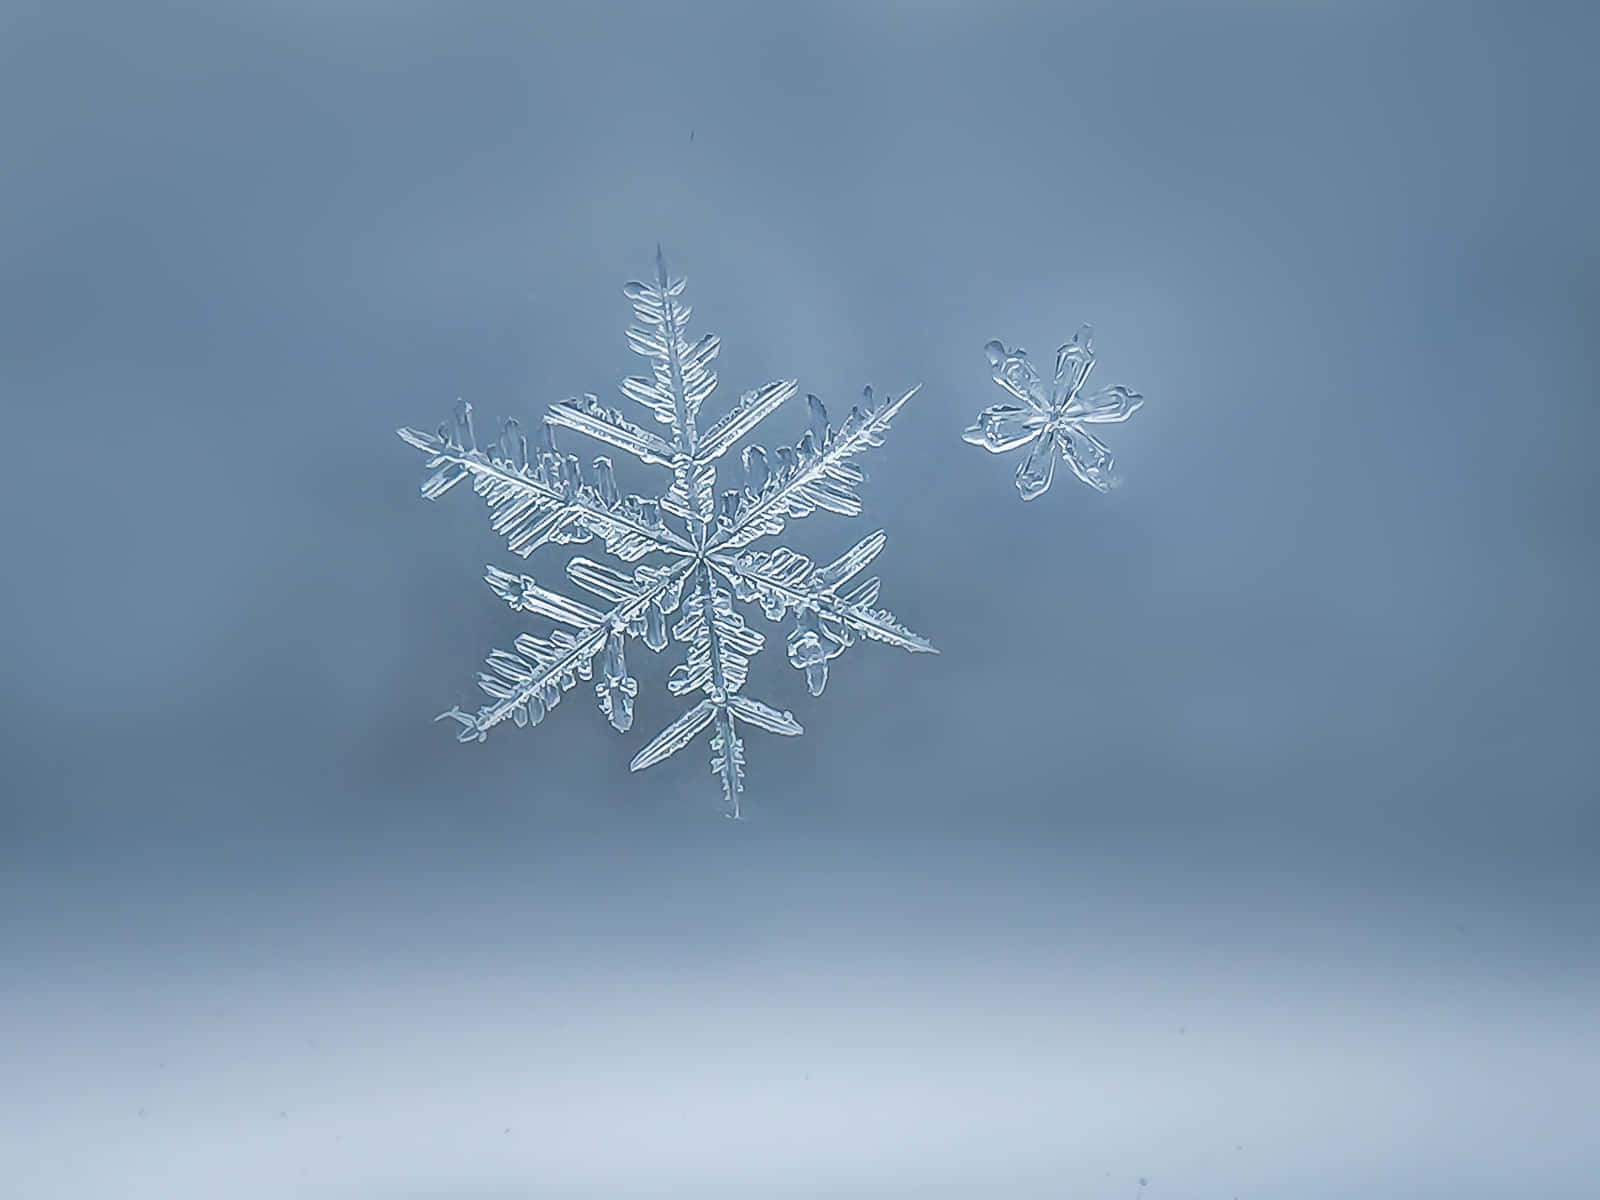 Photo  A beautiful snowflake pattern created by crystallized ice flakes